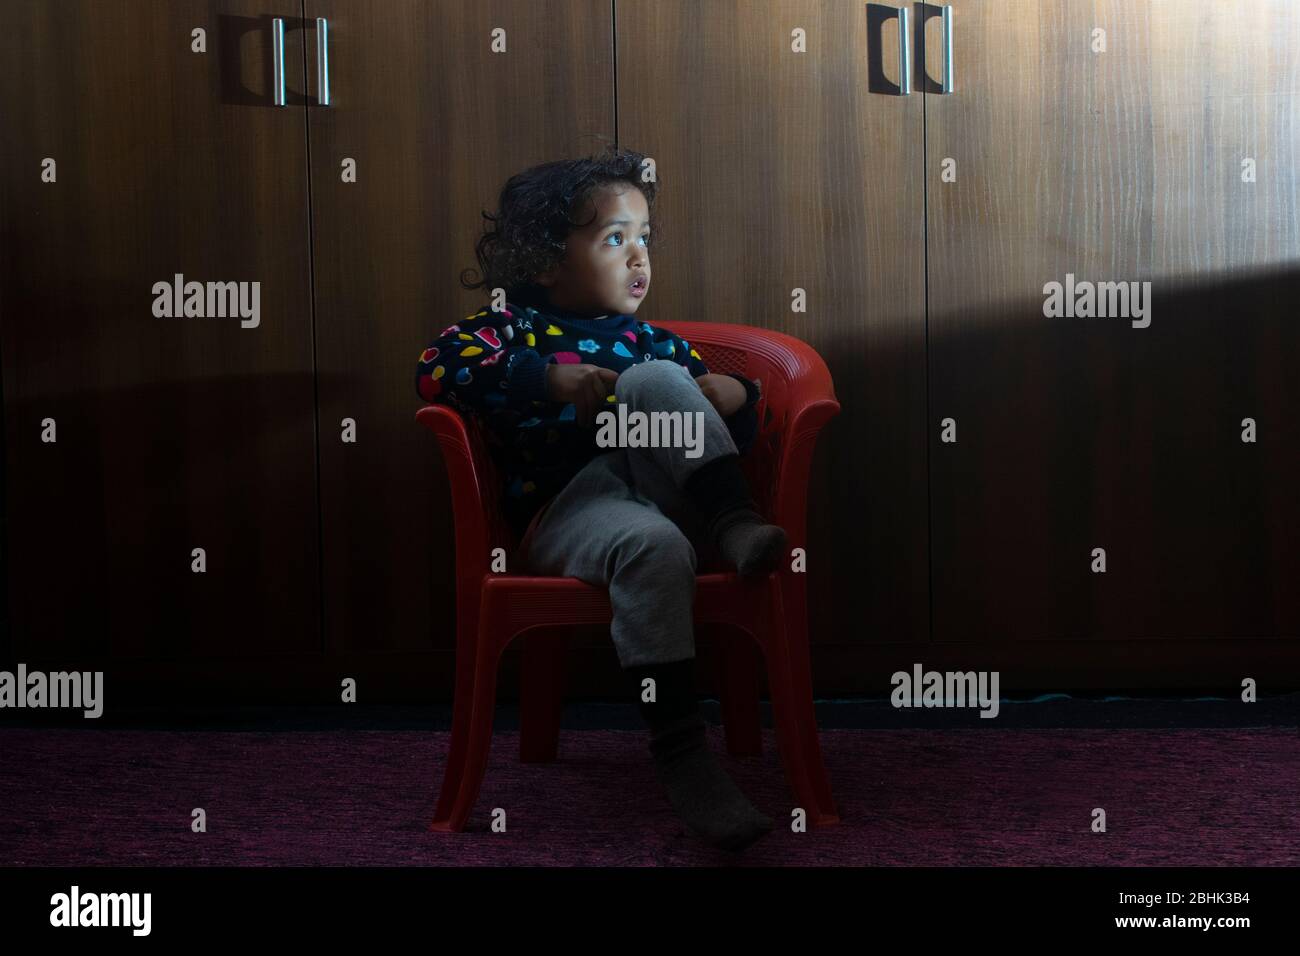 young child watching television Stock Photo